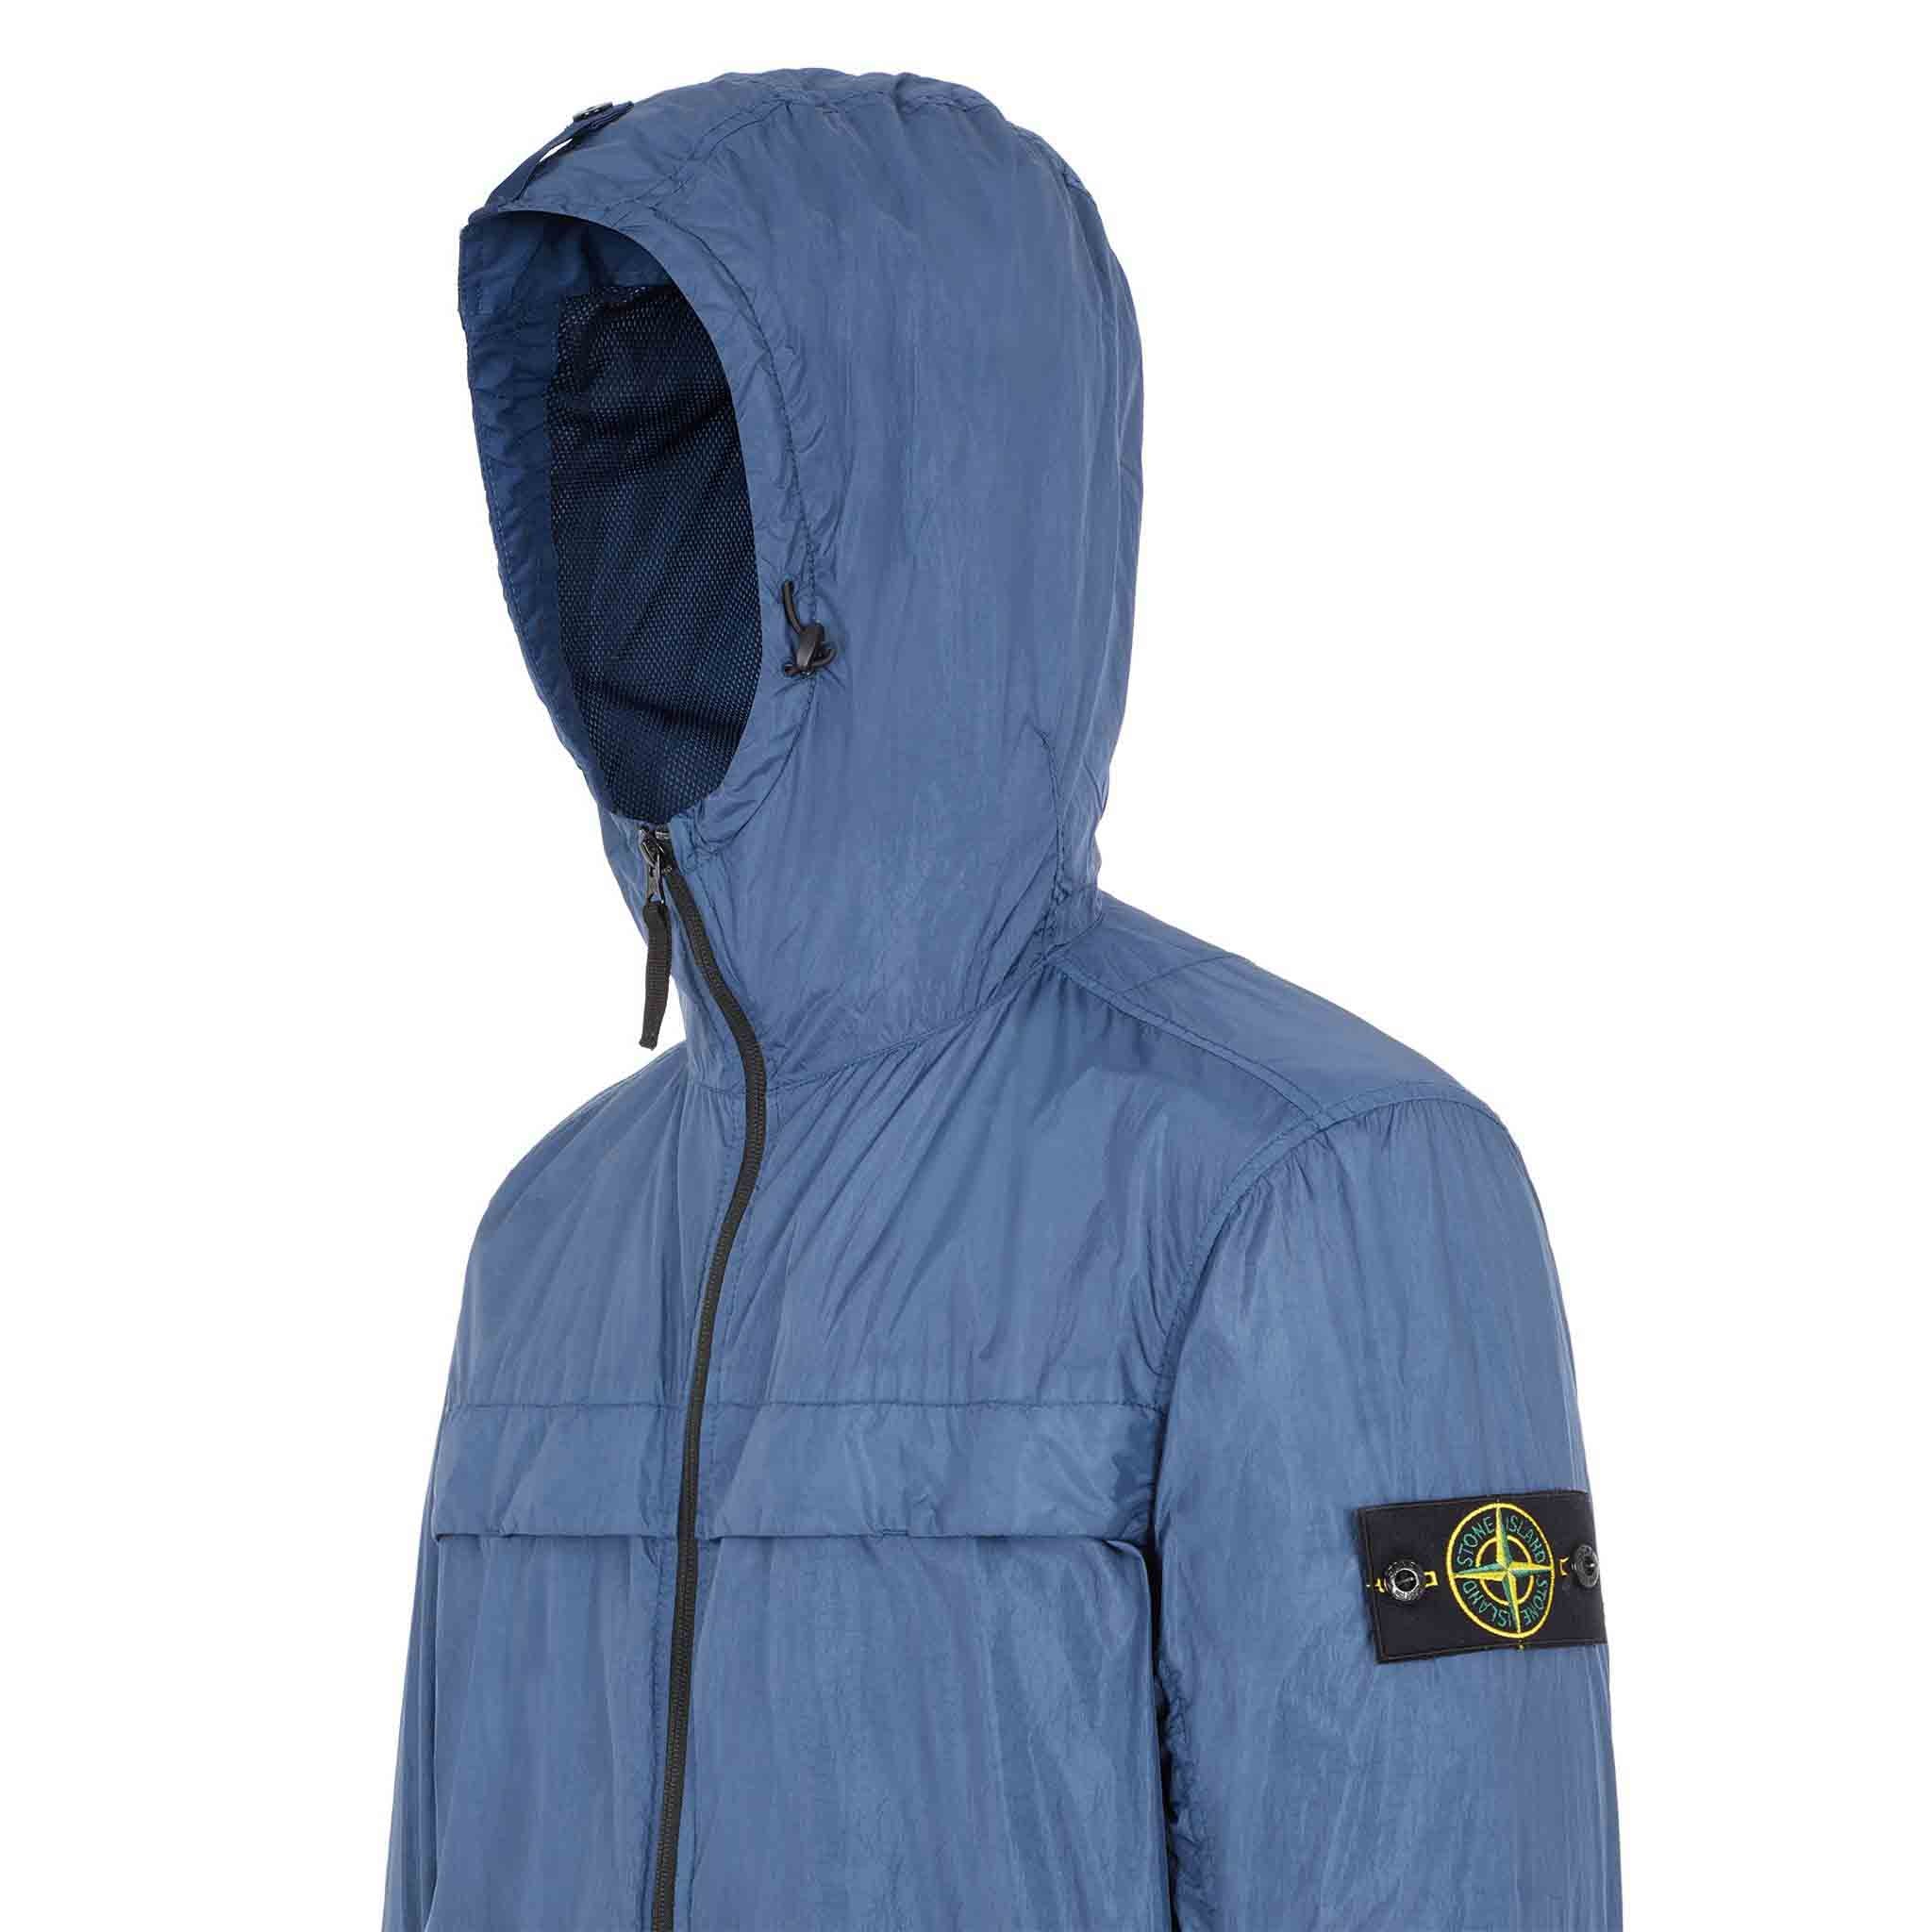 Stone Island Garment Dyed Crinkle Reps R-NY Hooded Jacket in Avio Blue